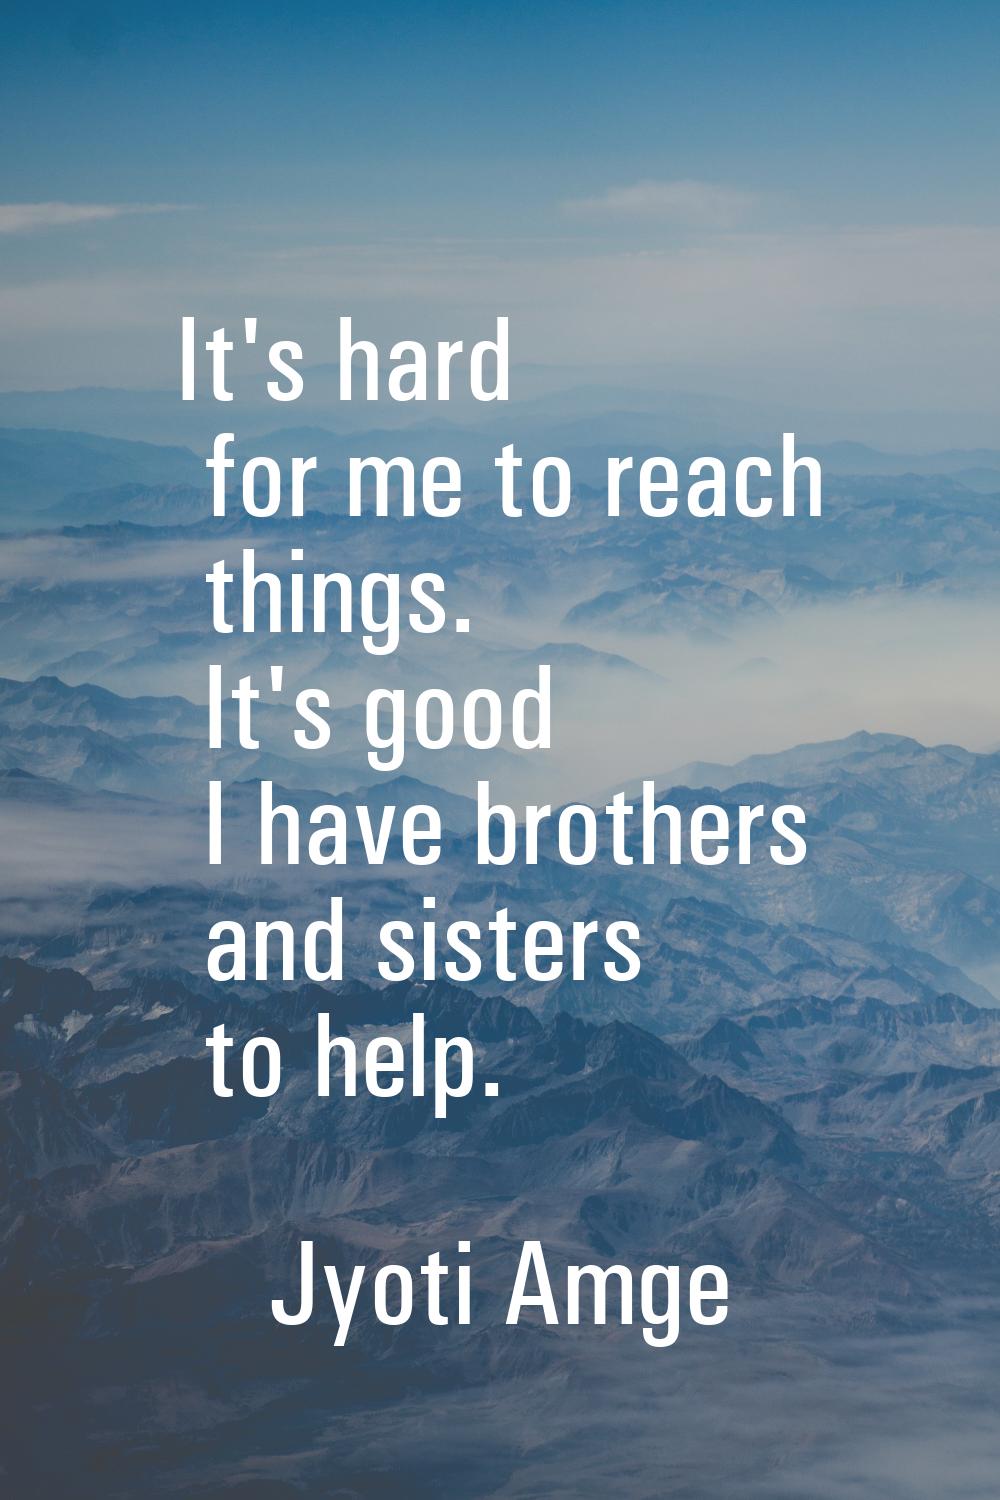 It's hard for me to reach things. It's good I have brothers and sisters to help.